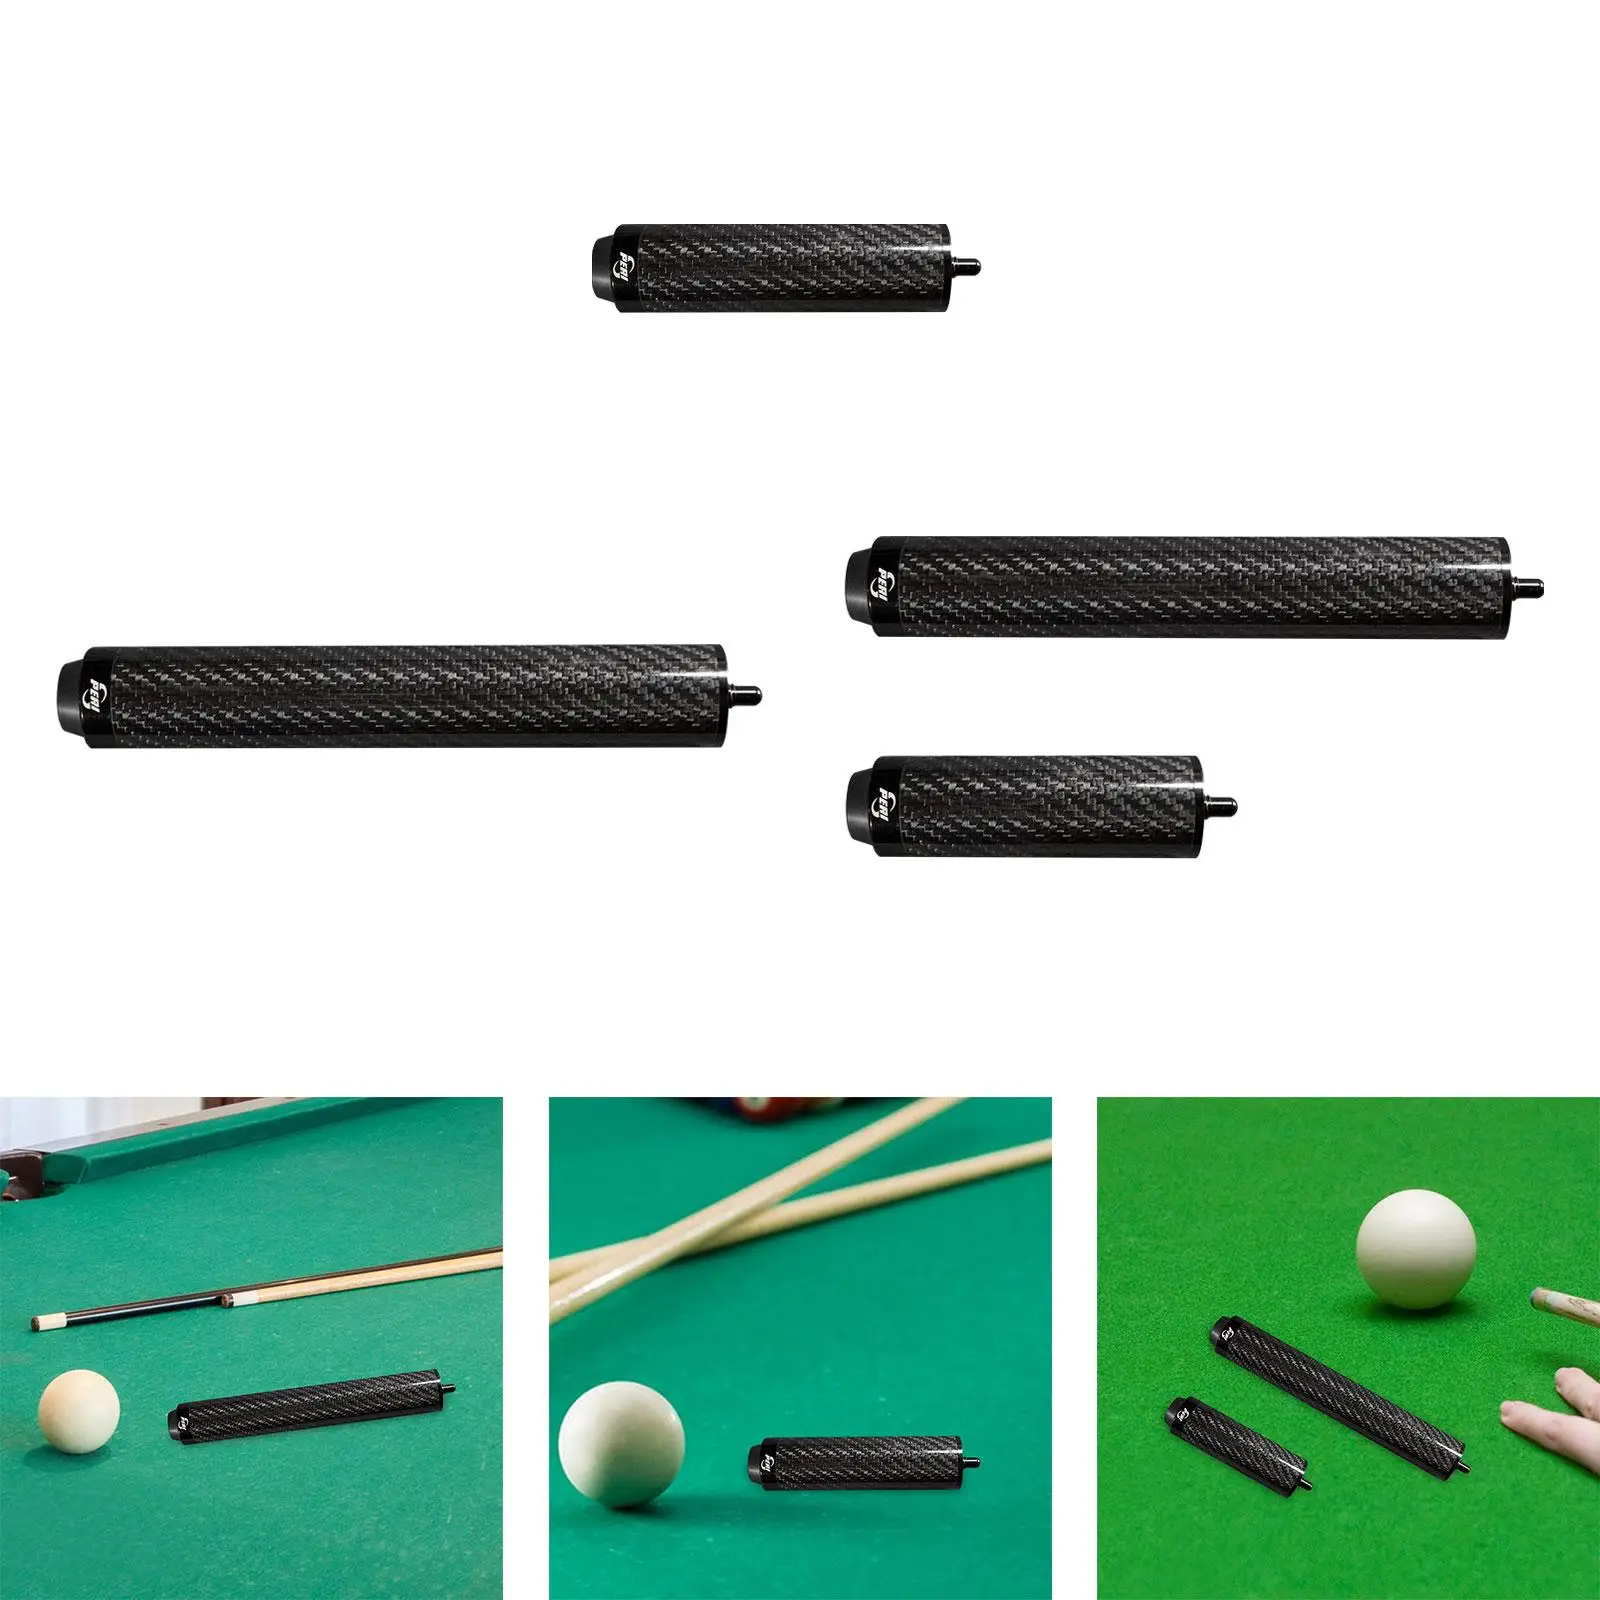 Billiards Pool Cue Extension, Cue Rod Extension, Weights Replacement Black Billiard Connect Shaft Snooker for Professional